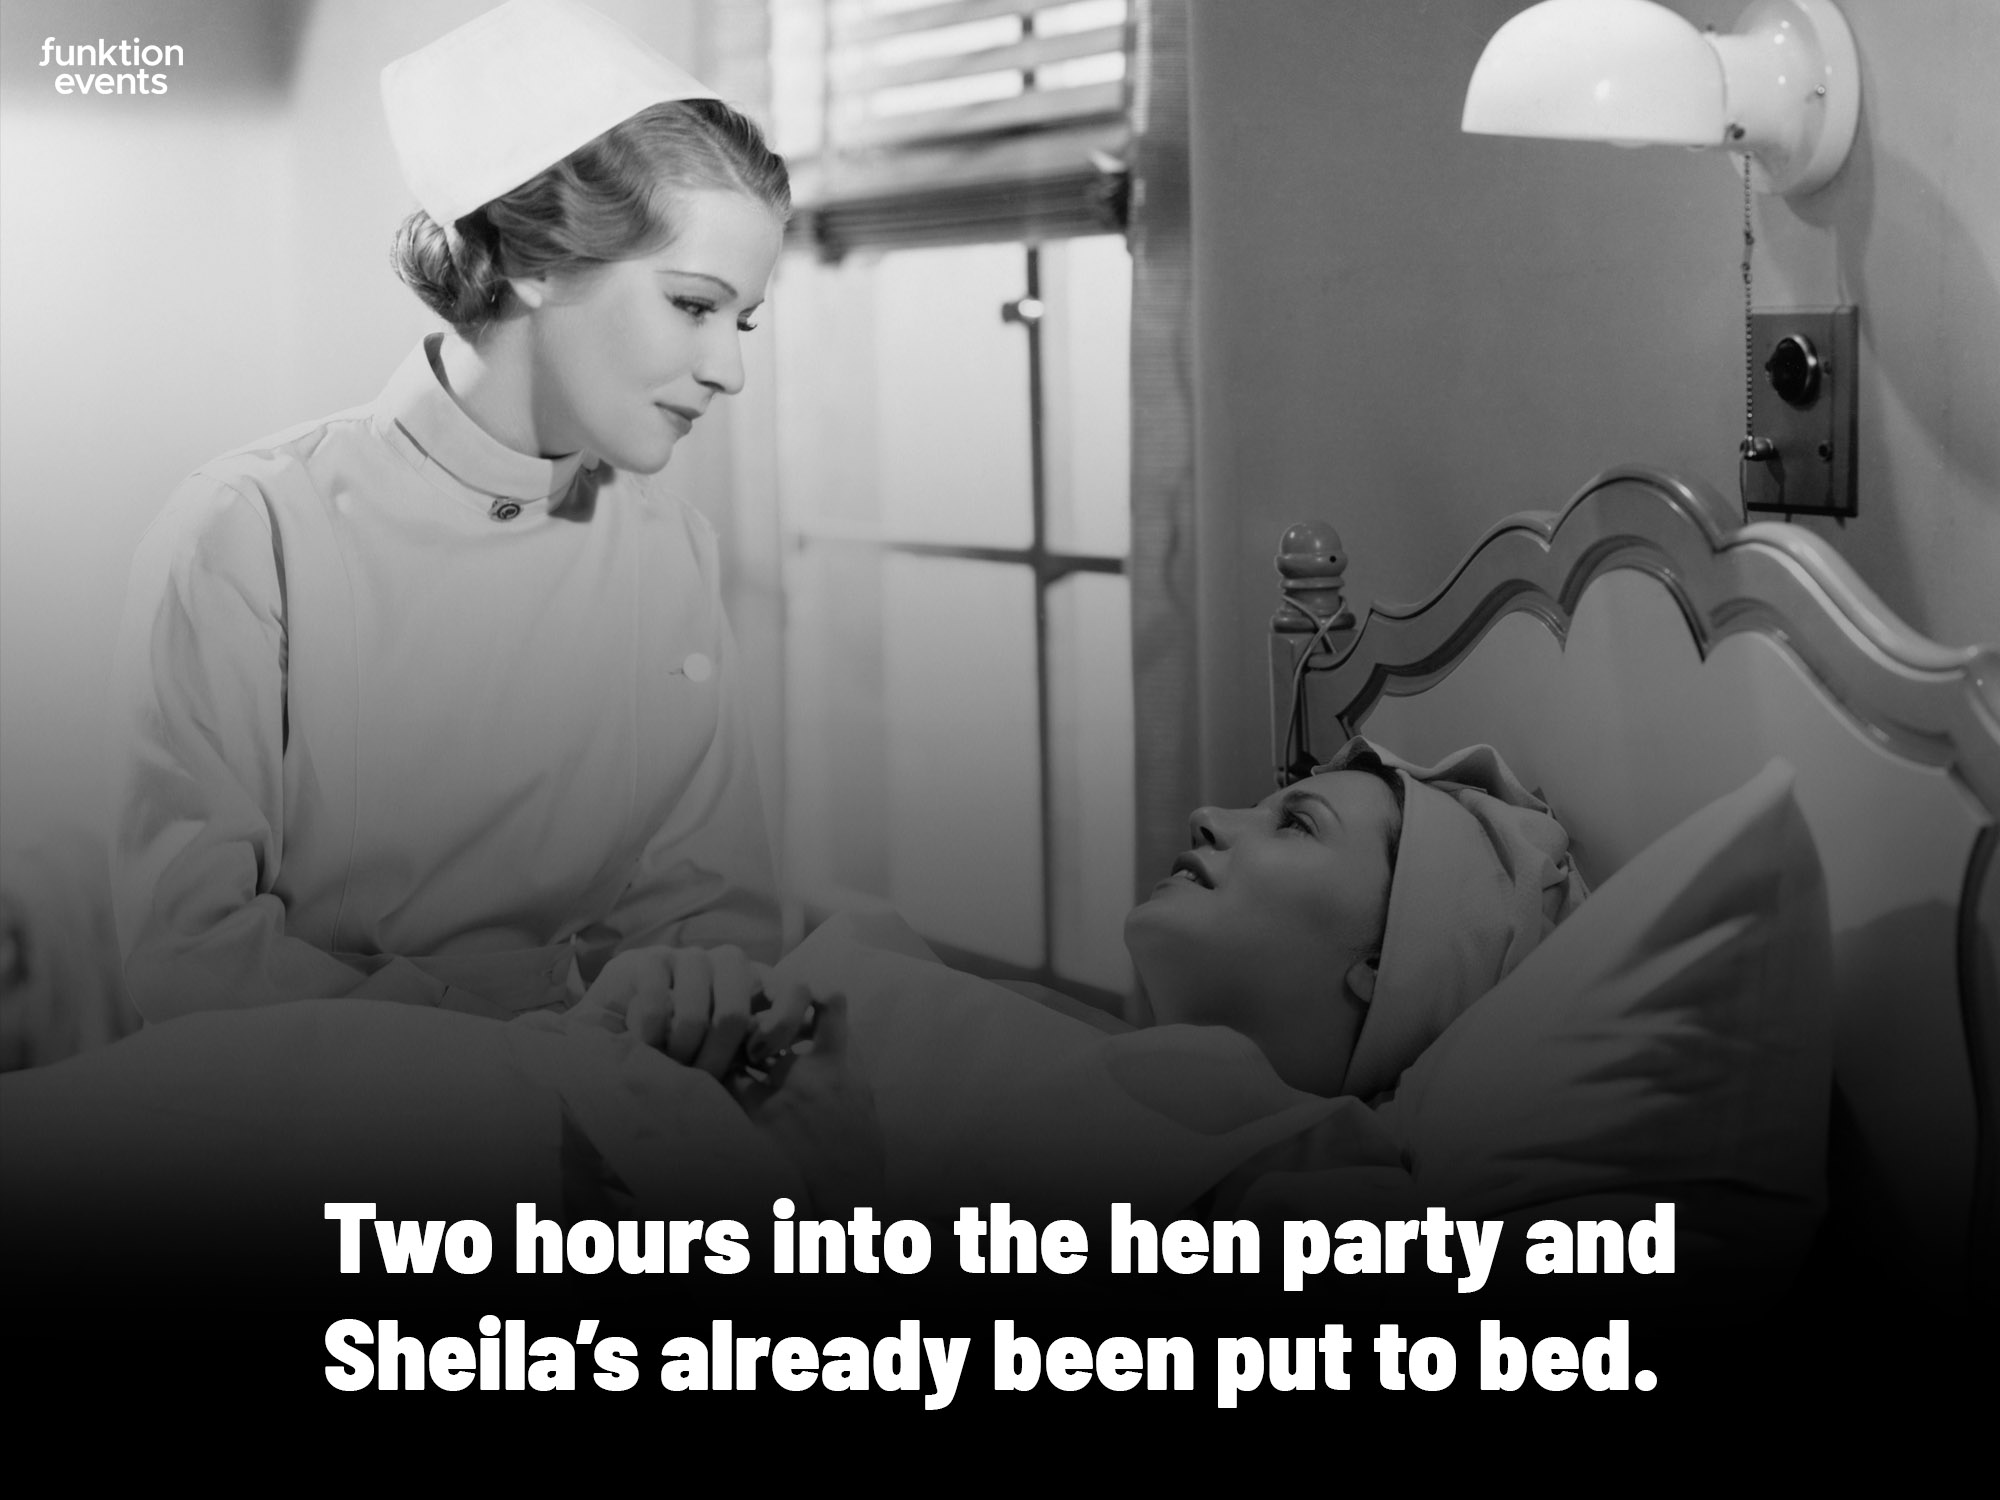 Two hours into the hen party and Sheila's already been put to bed - Meme 1